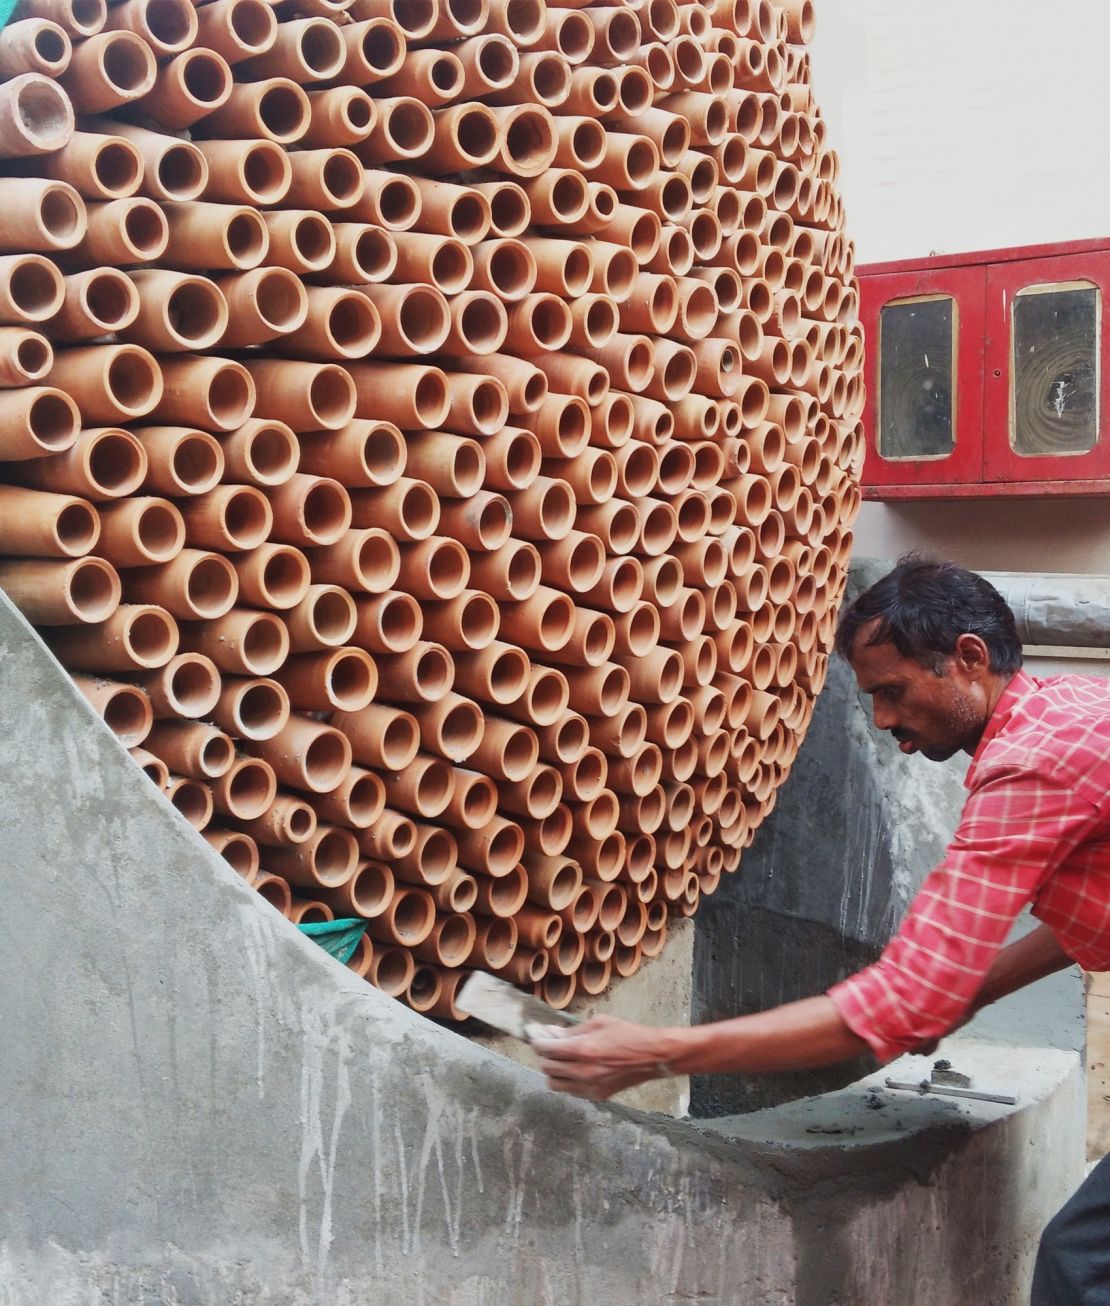 A beehive-like terracotta cooling structure being built in Noida, Uttar Pradesh.